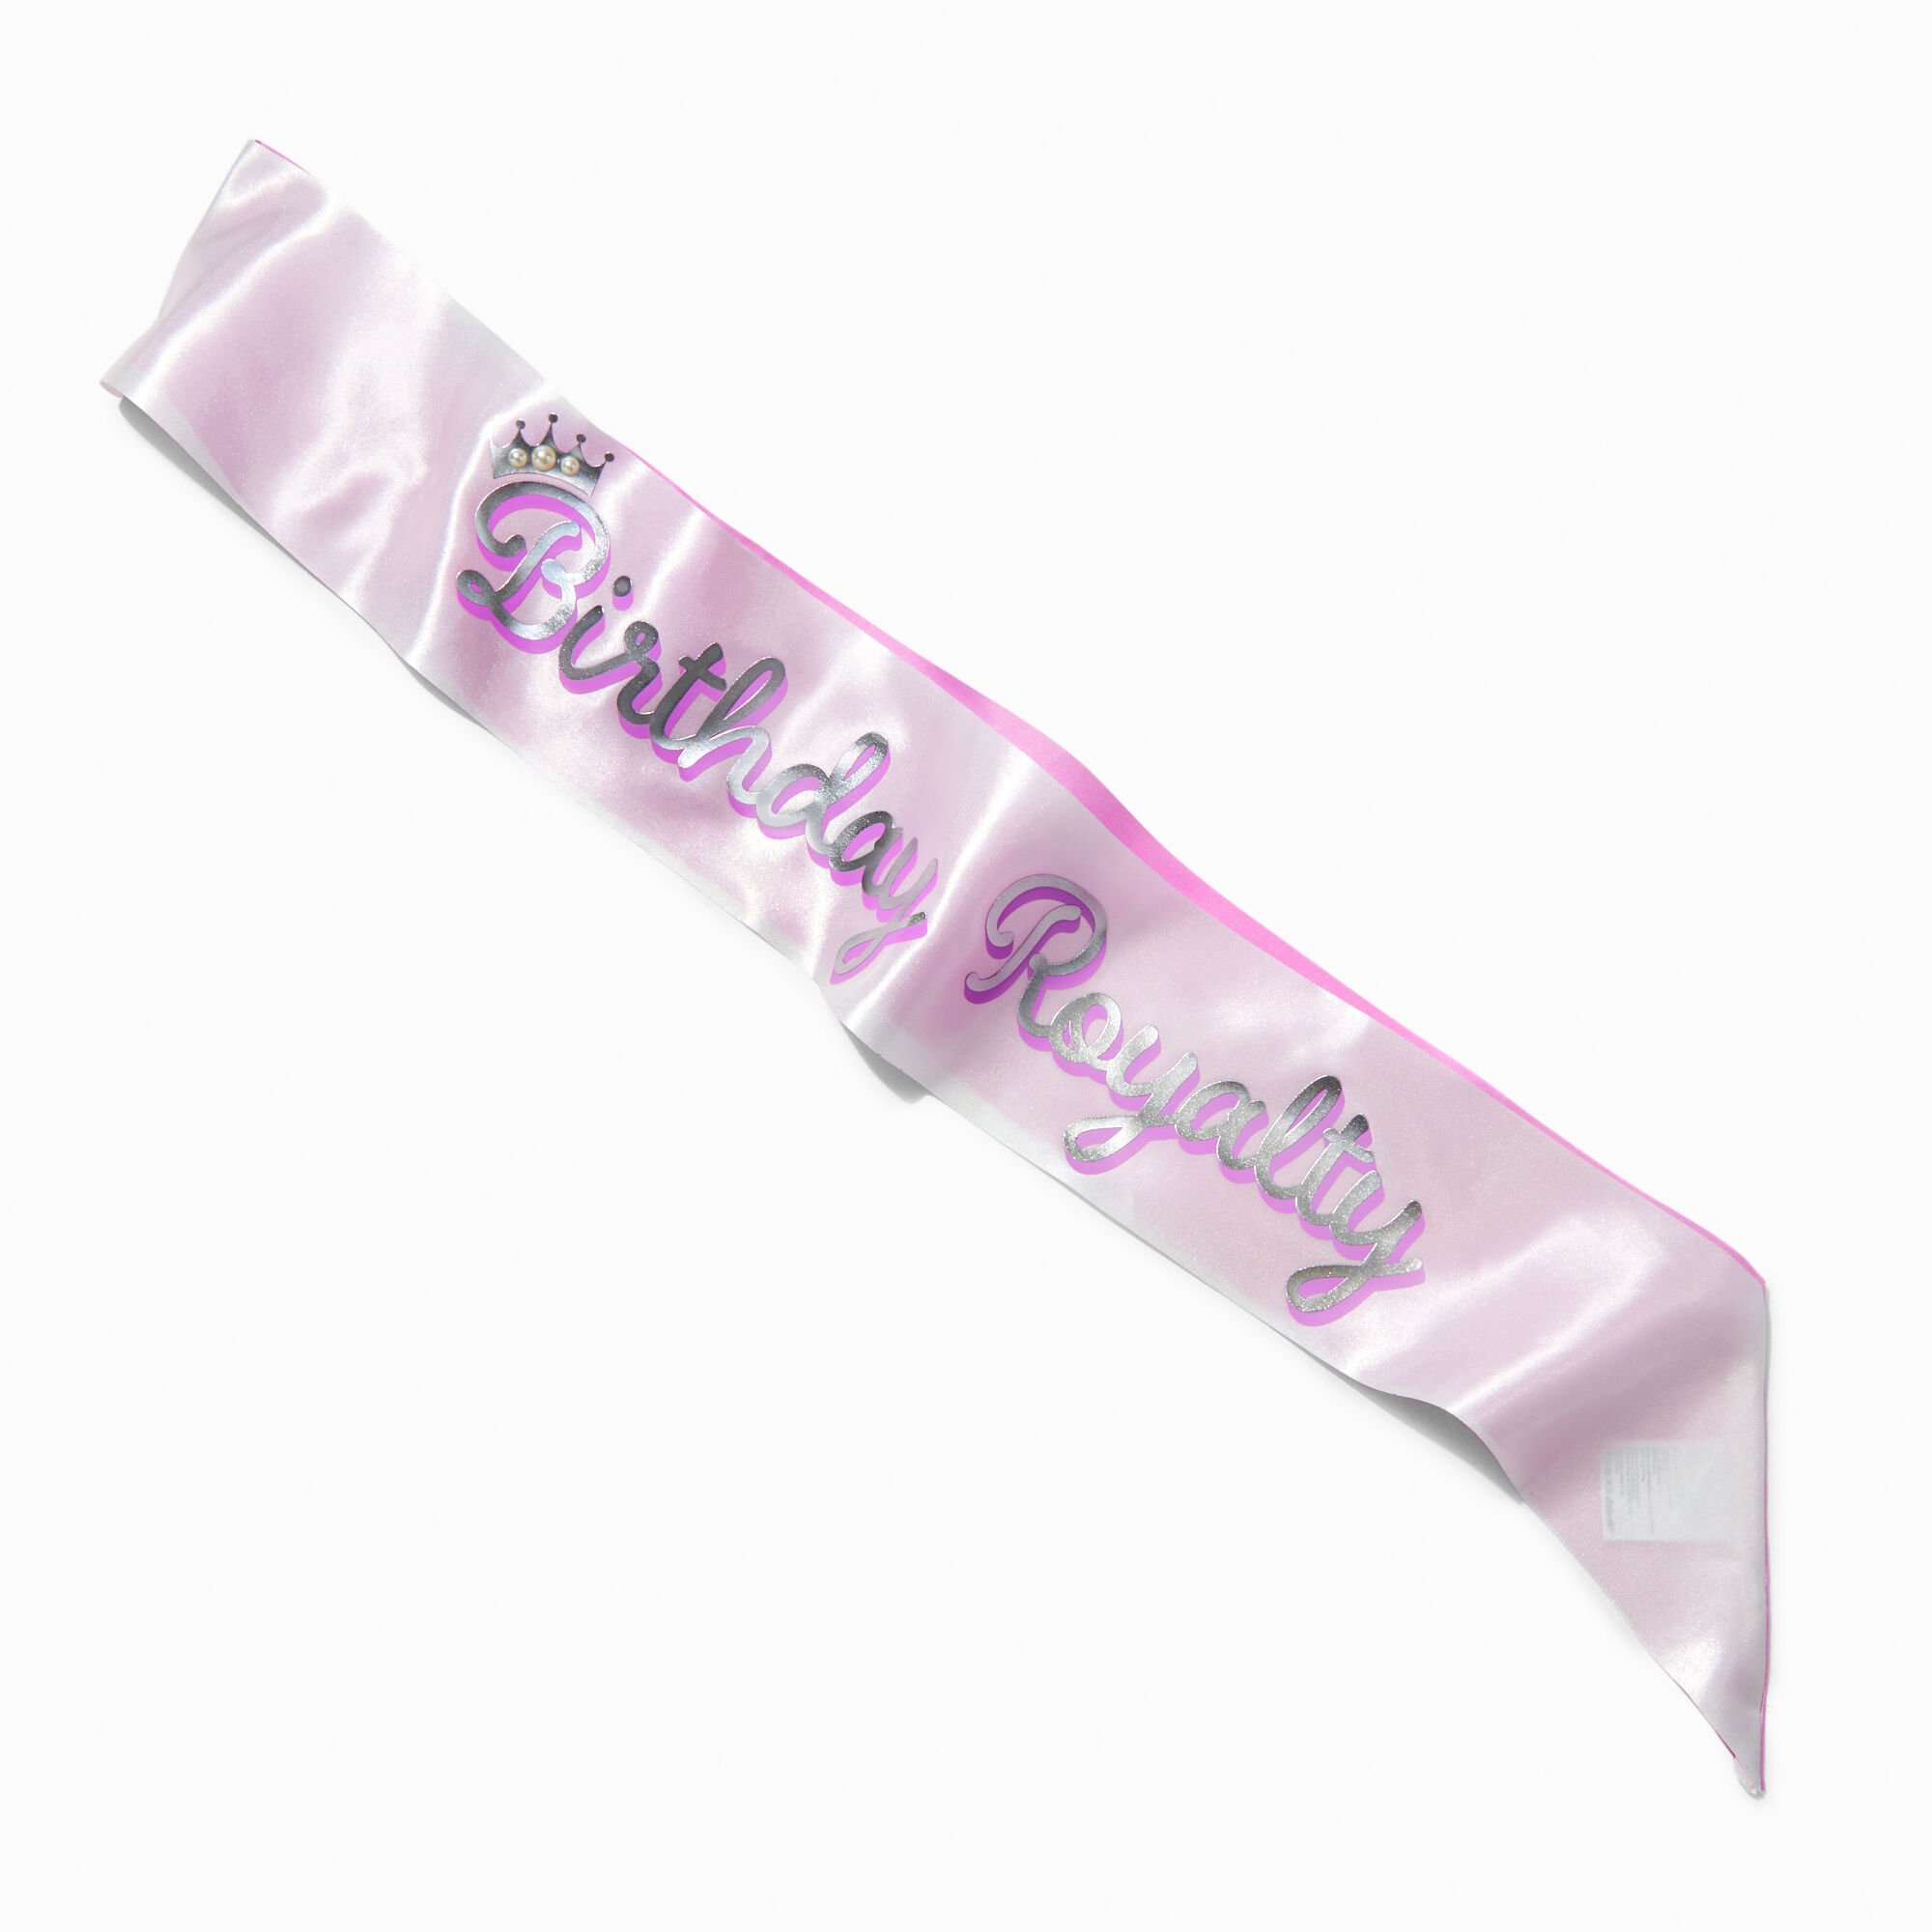 View Claires birthday Royalty Sash Pink information